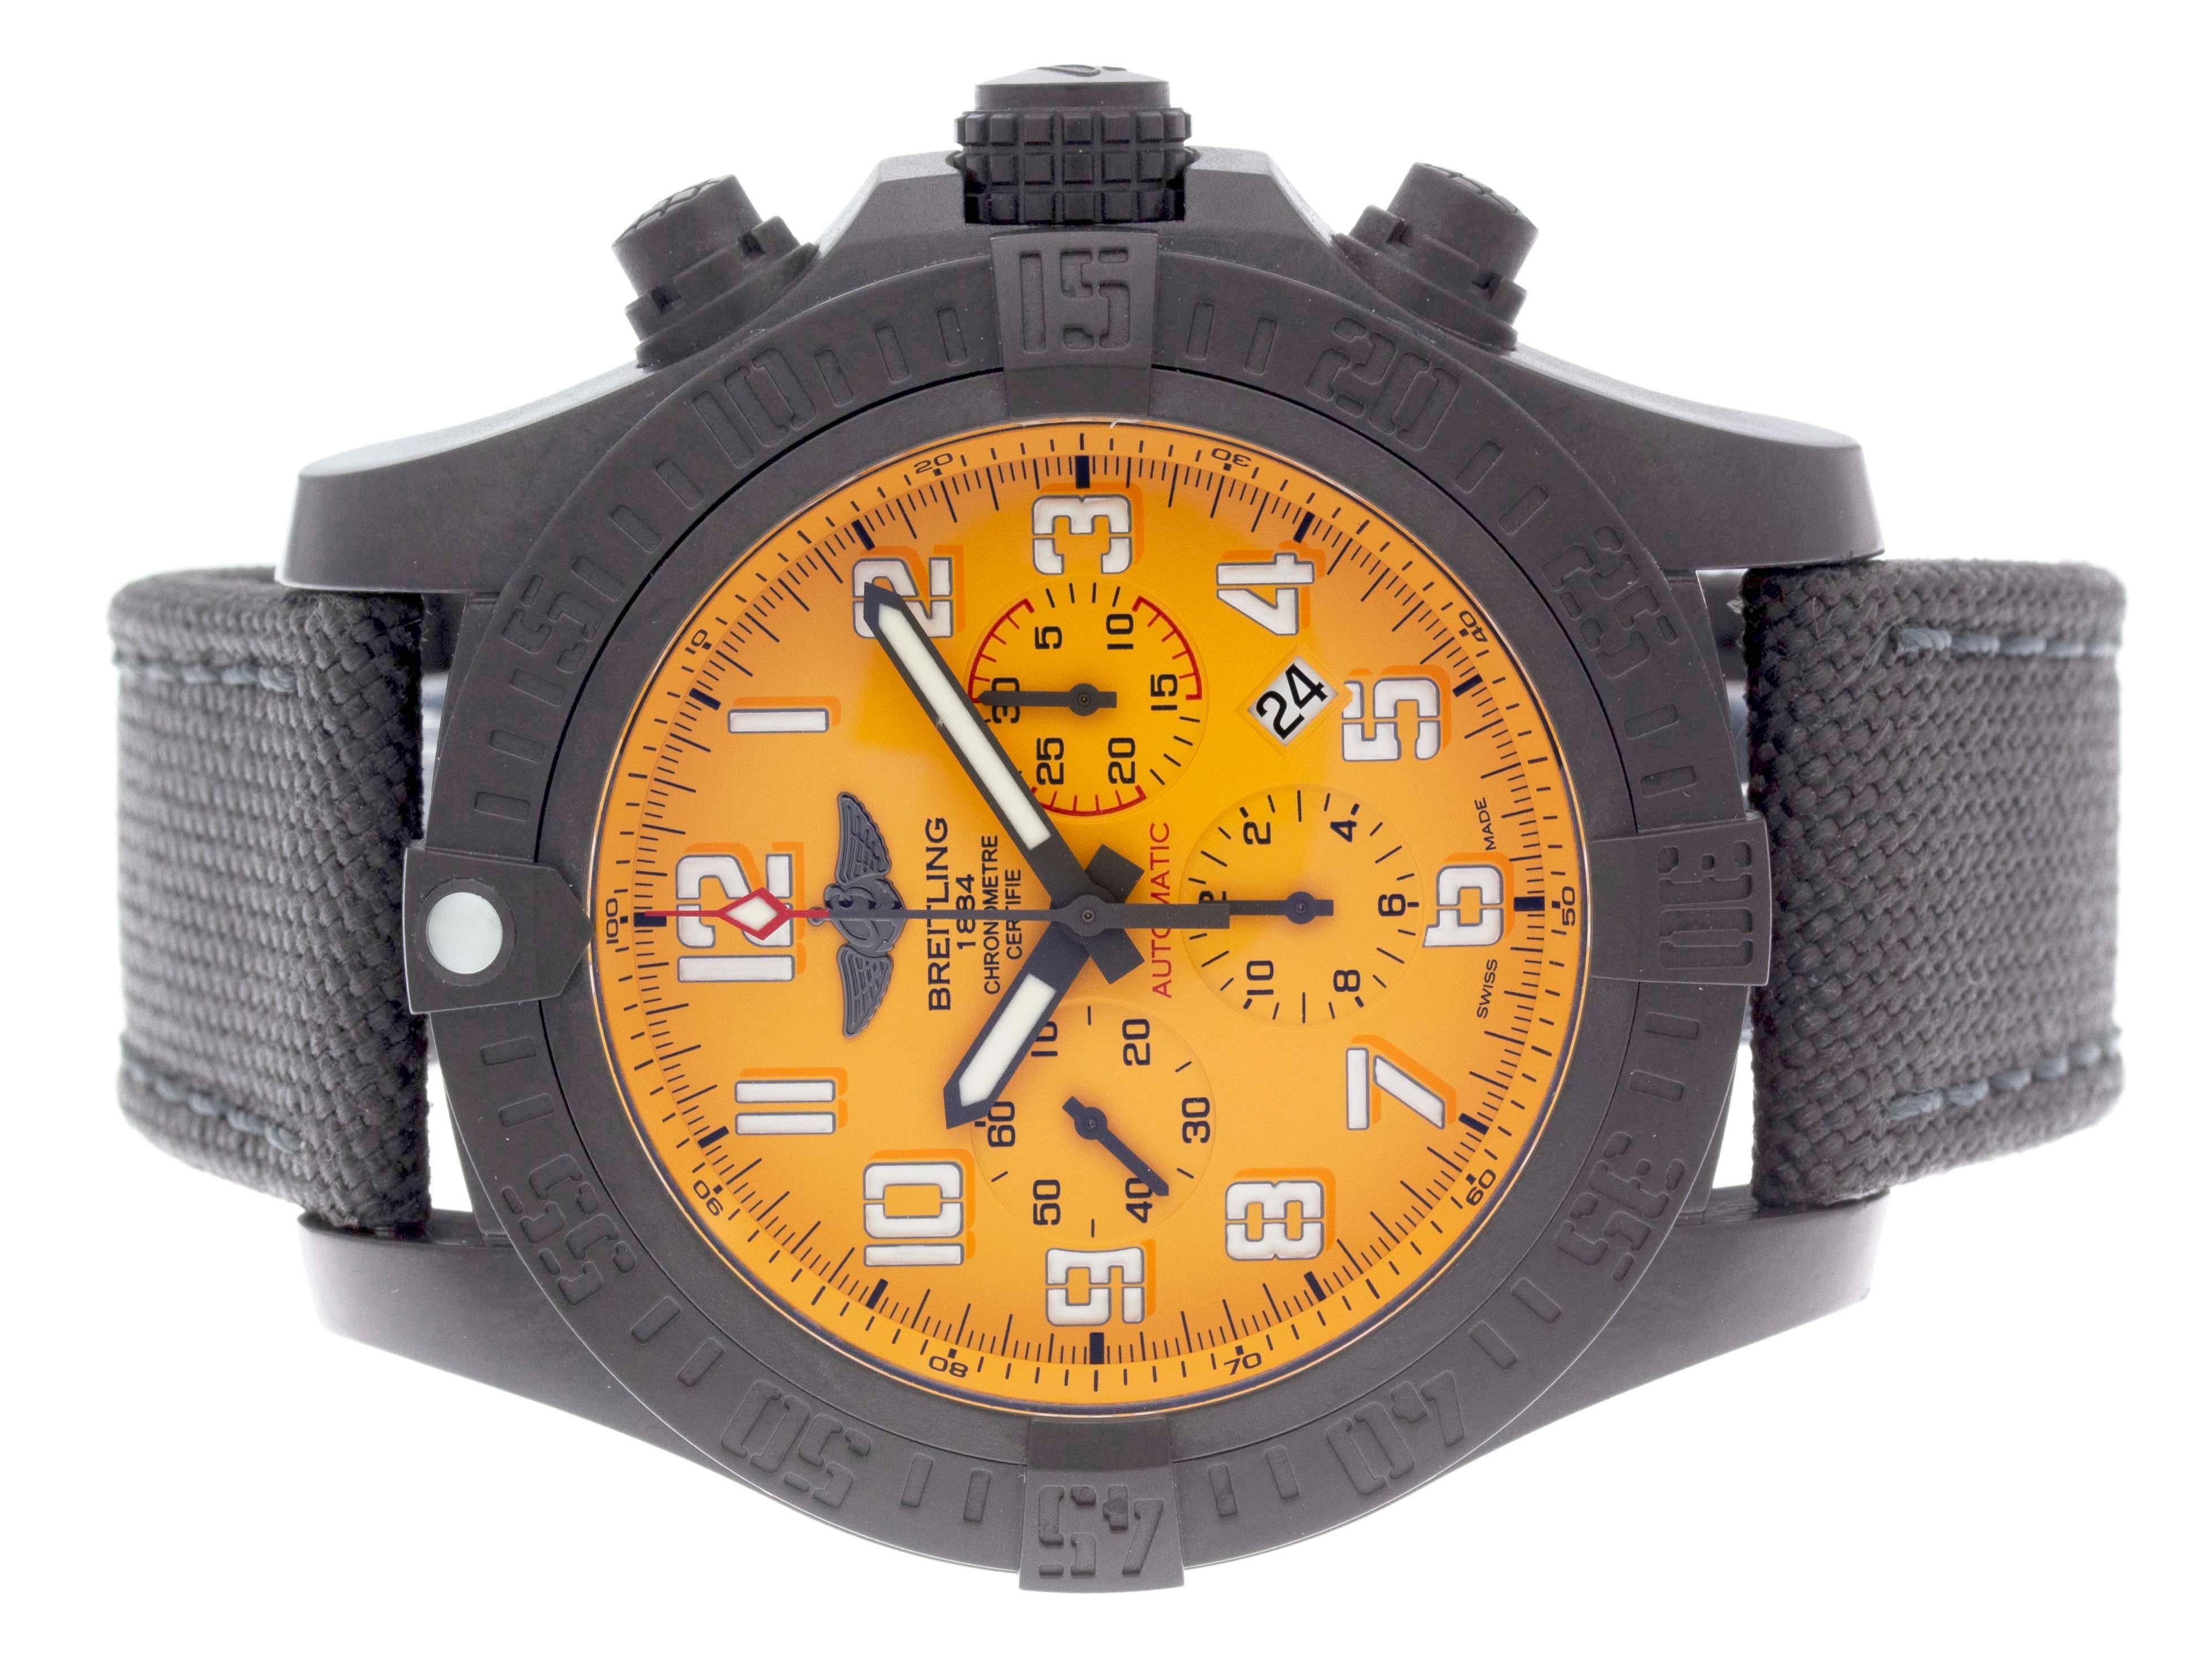 Ultralight Polymer Breitling Avenger Hurricane watch with a 50mm case, yellow dial, and military strap with tang buckle. Features include hours, minutes, seconds, date, and chronograph. Water Resistant up to 100M / 330FT. Comes with a Deluxe Gift